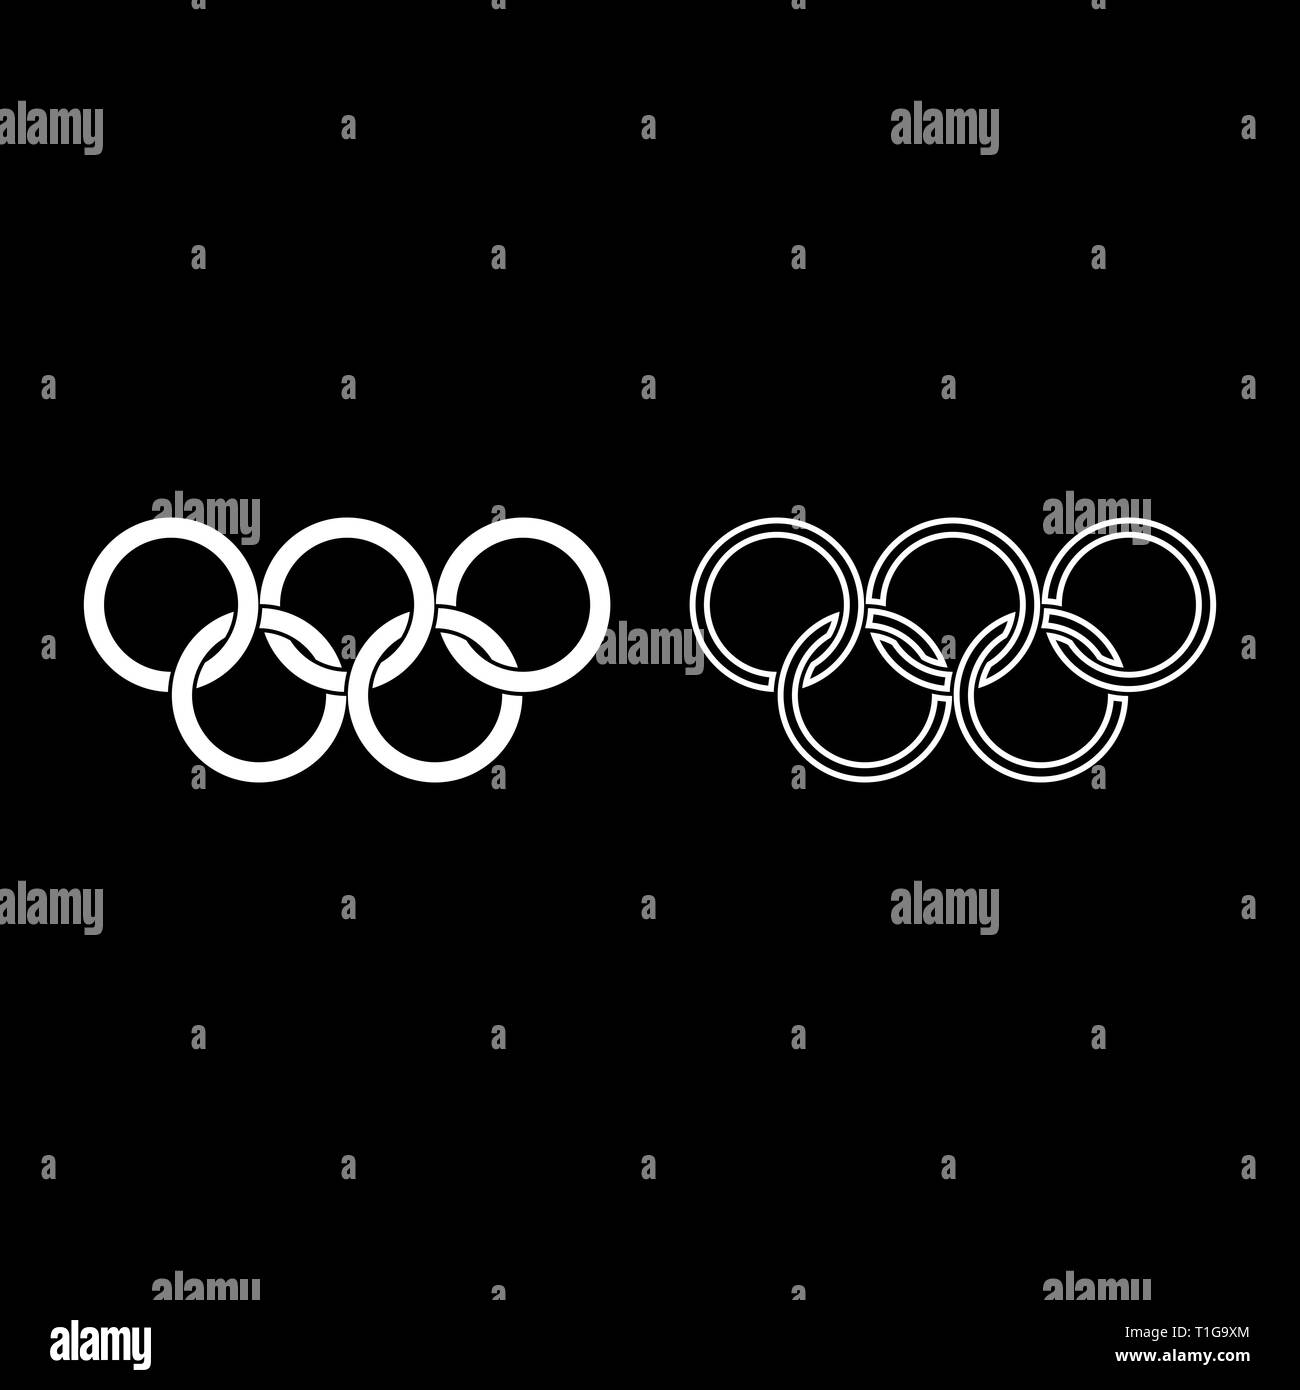 What Exactly Do the Five Rings Of the Olympics Mean?